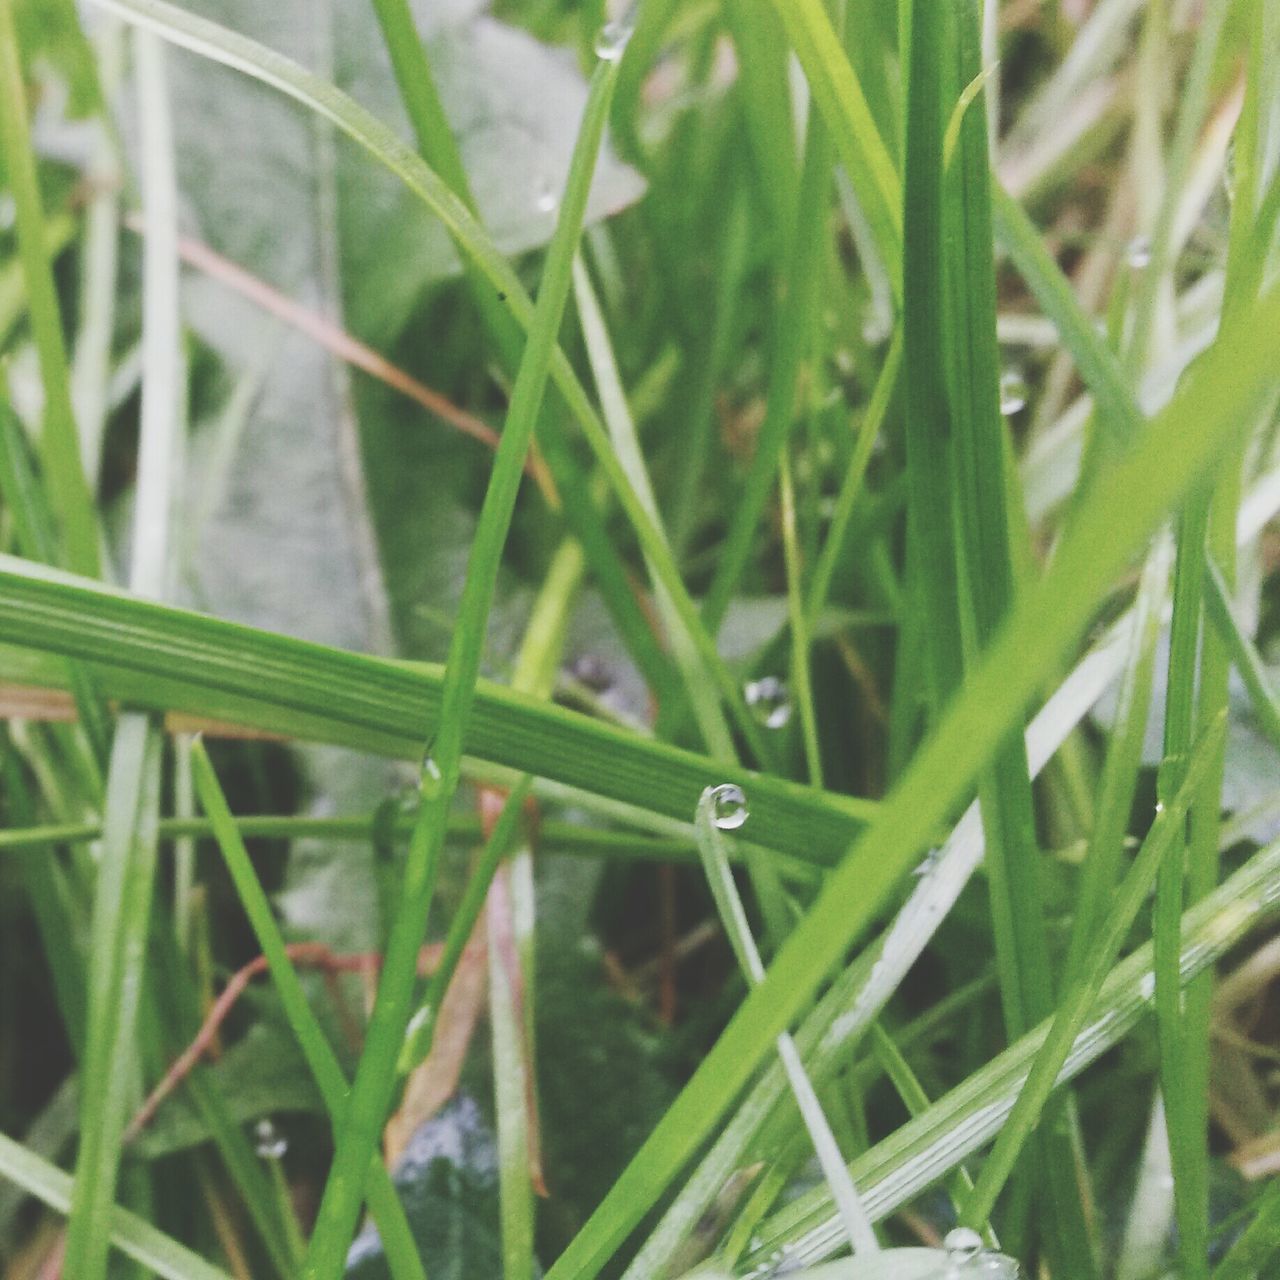 green color, grass, blade of grass, growth, close-up, drop, plant, nature, selective focus, leaf, wet, beauty in nature, field, focus on foreground, water, green, freshness, dew, day, outdoors